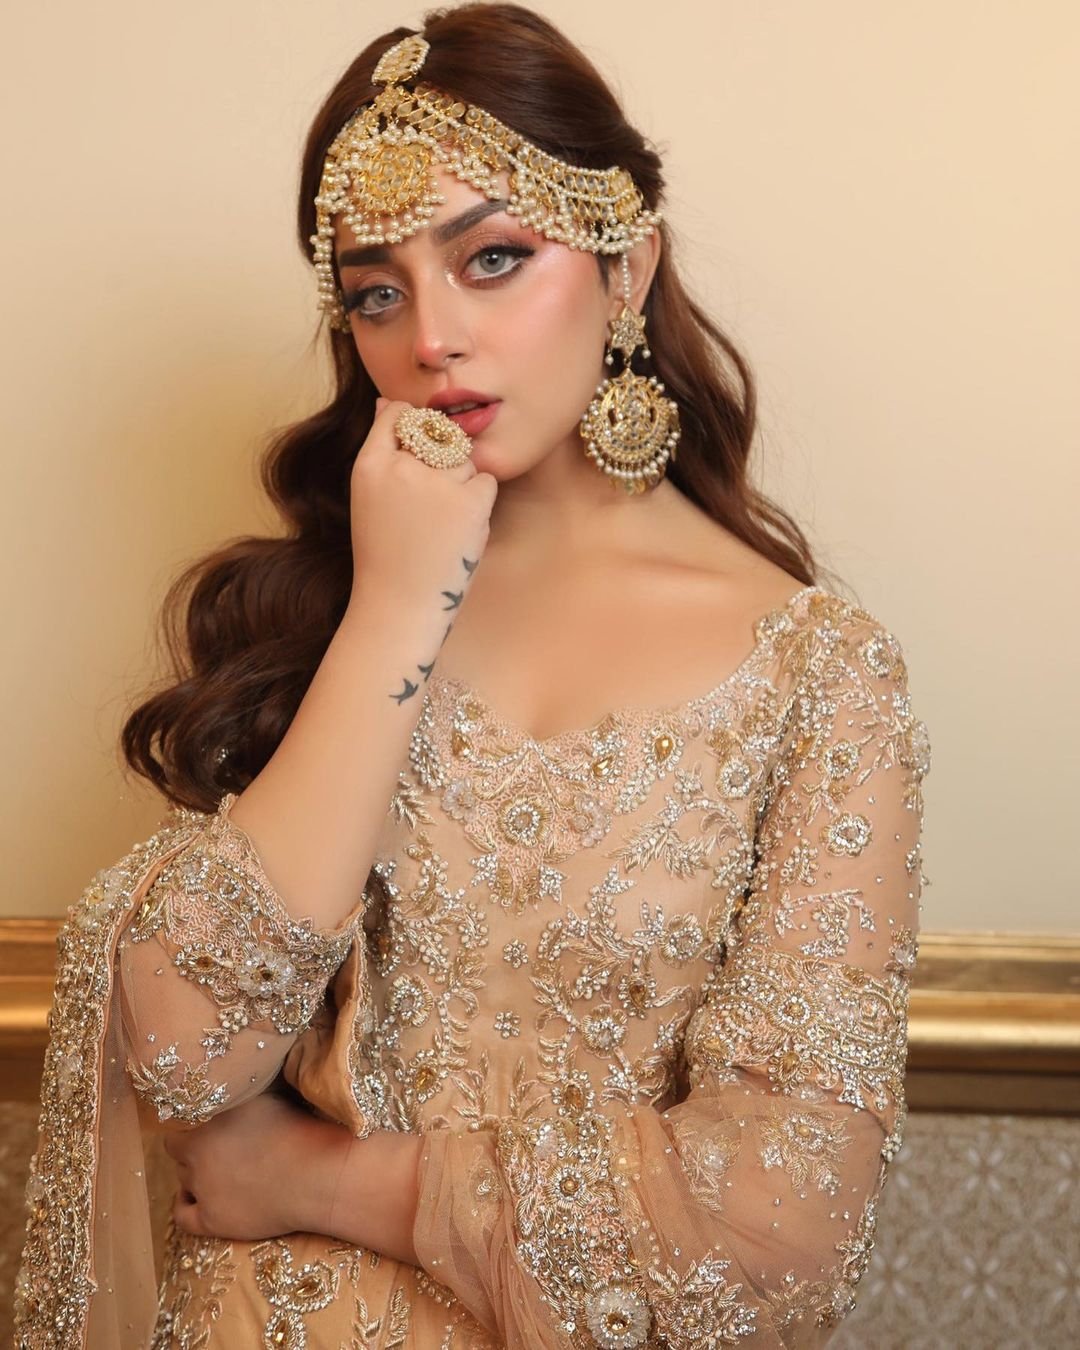 Alizeh Shah Stunning Pictures in Ivory Bridal attire